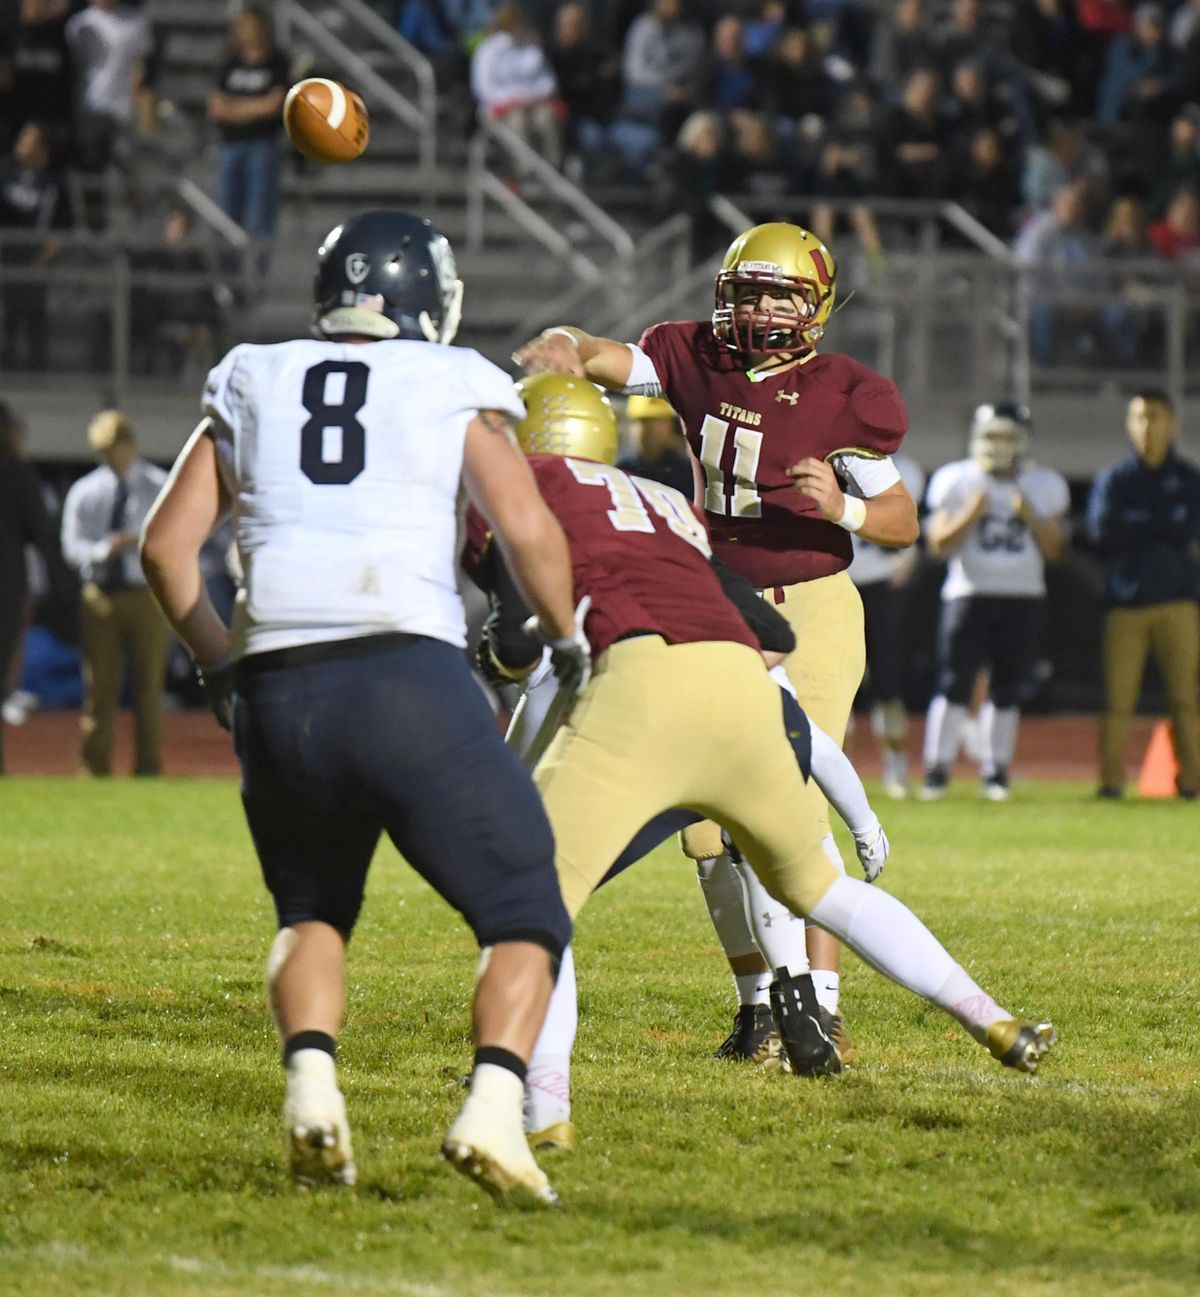 University High School quarterback Gavin Wolcott releases a short pass before he’s overrun run down Friday, Sept. 14, 2018 at University High during a game against Gonzaga Prep. (Jesse Tinsley / The Spokesman-Review)